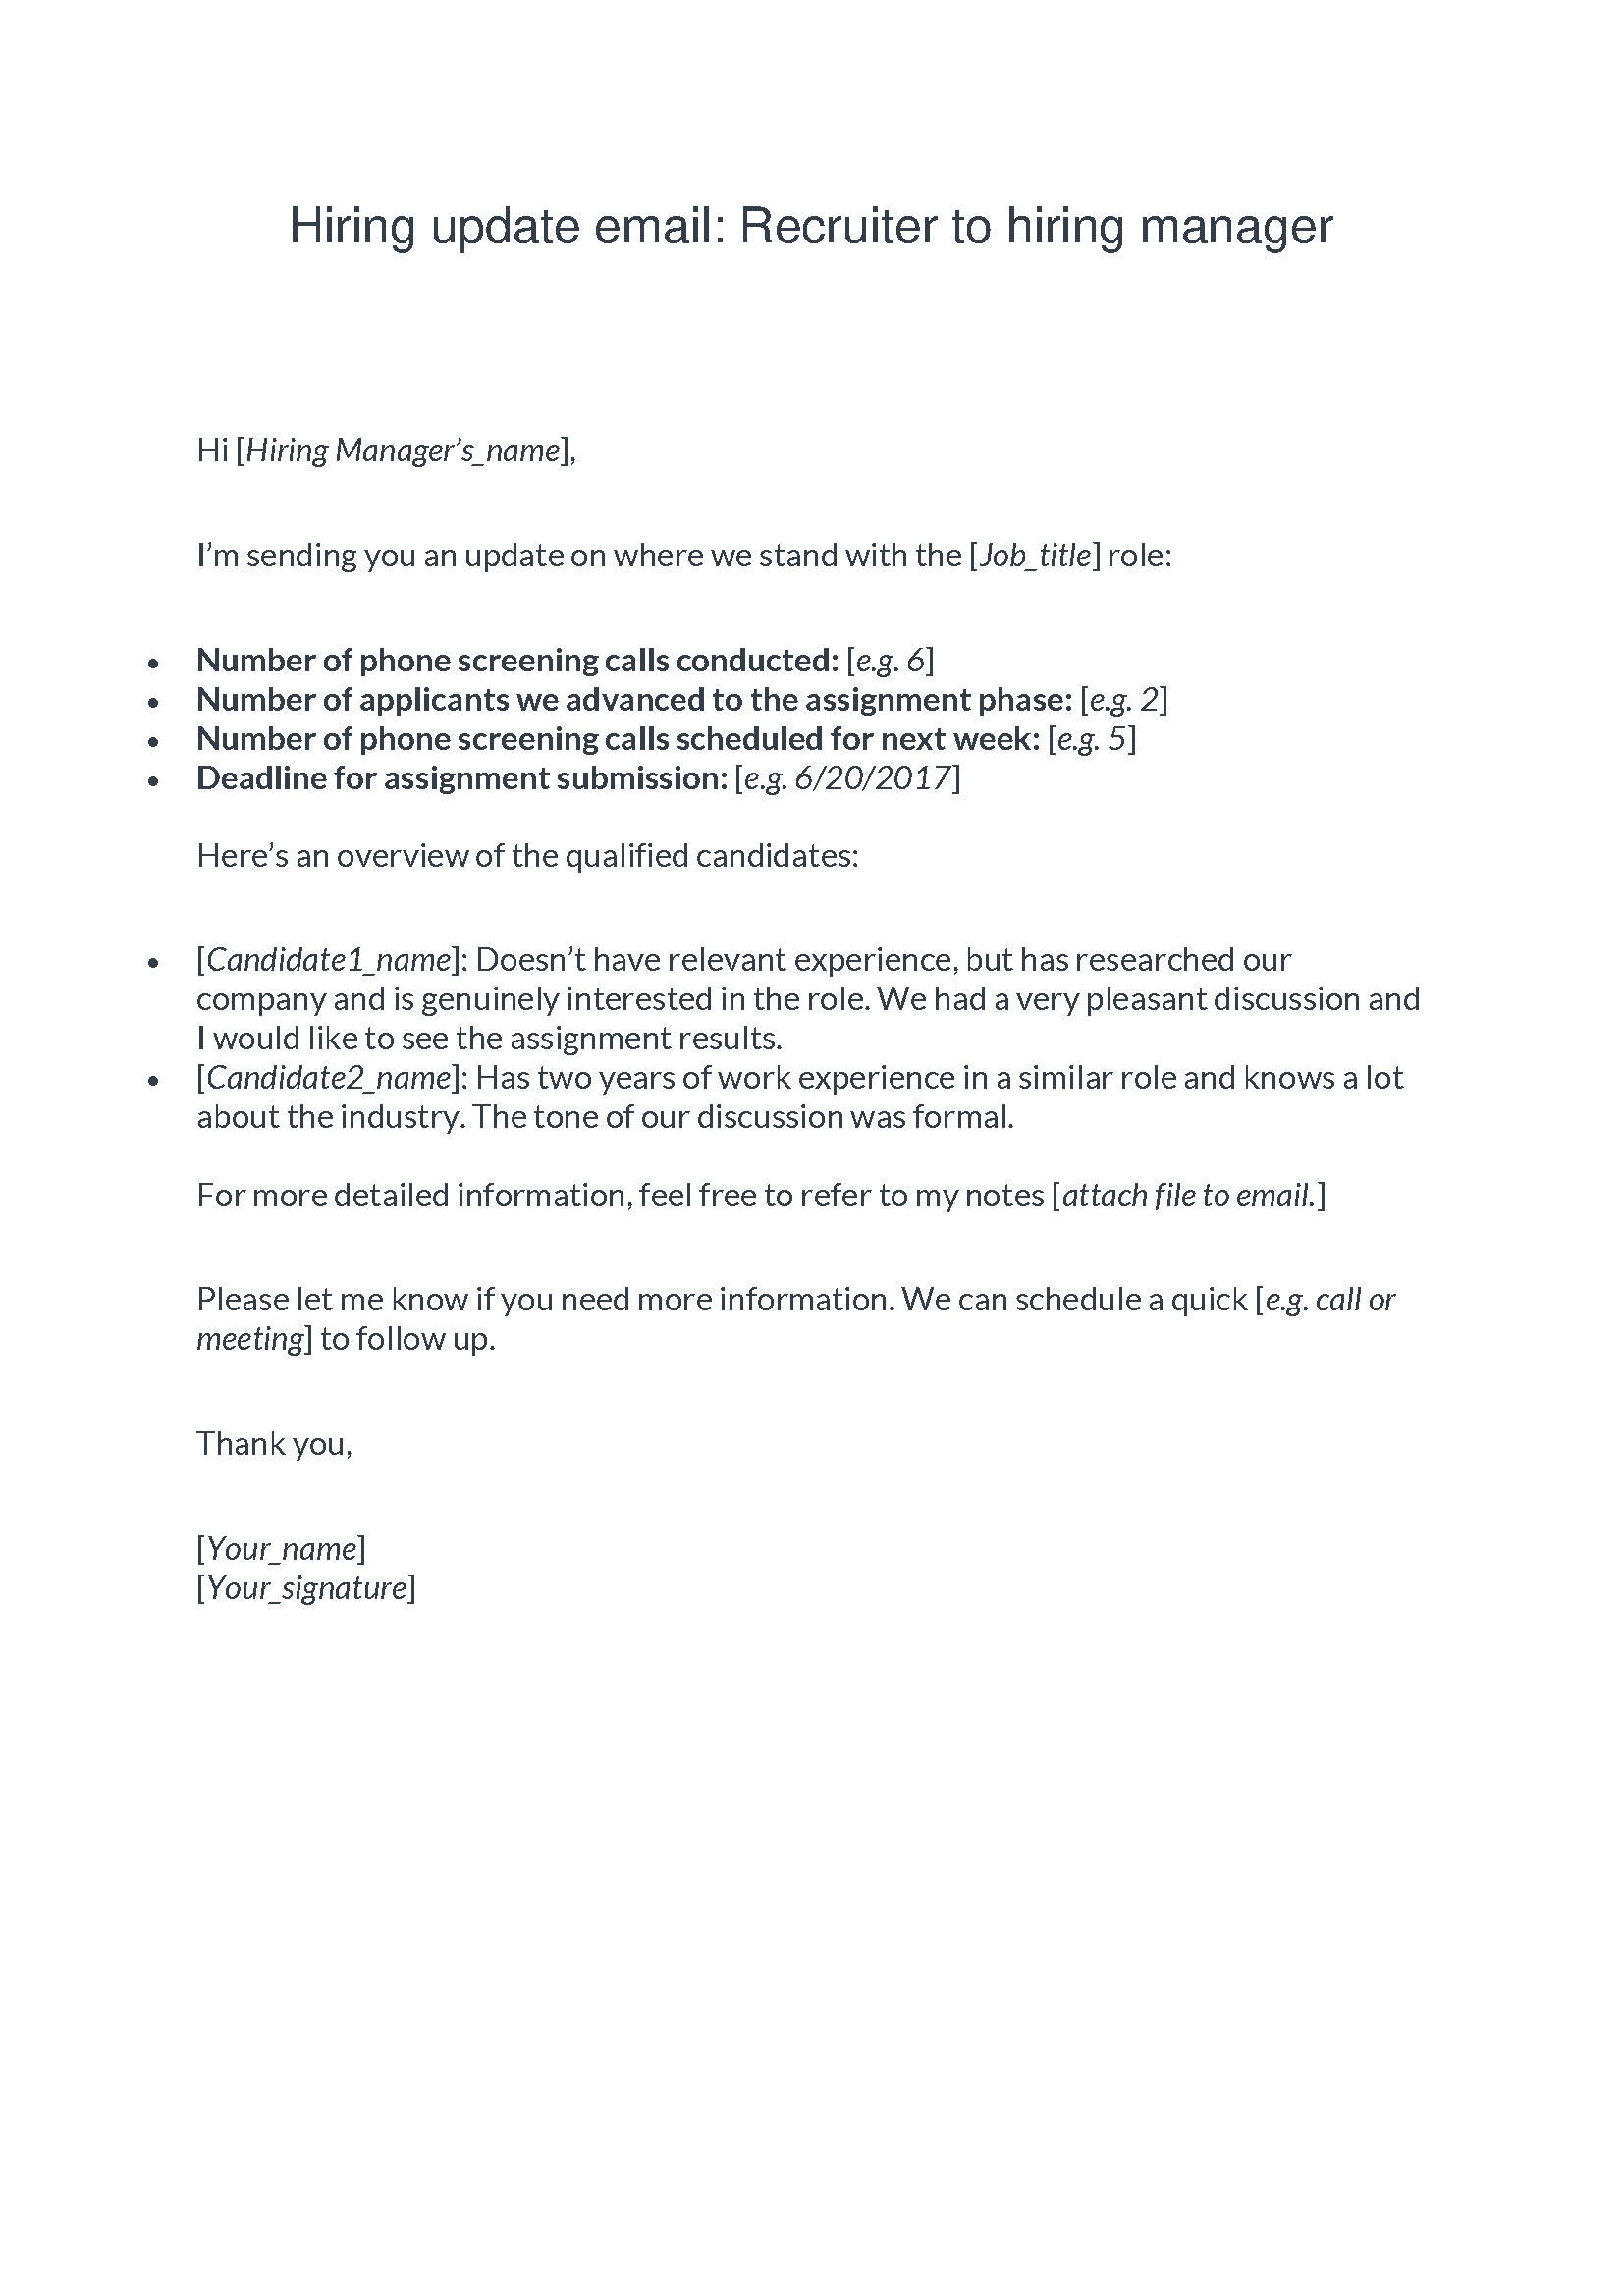 5 -Hiring update email Recruiter to hiring manager